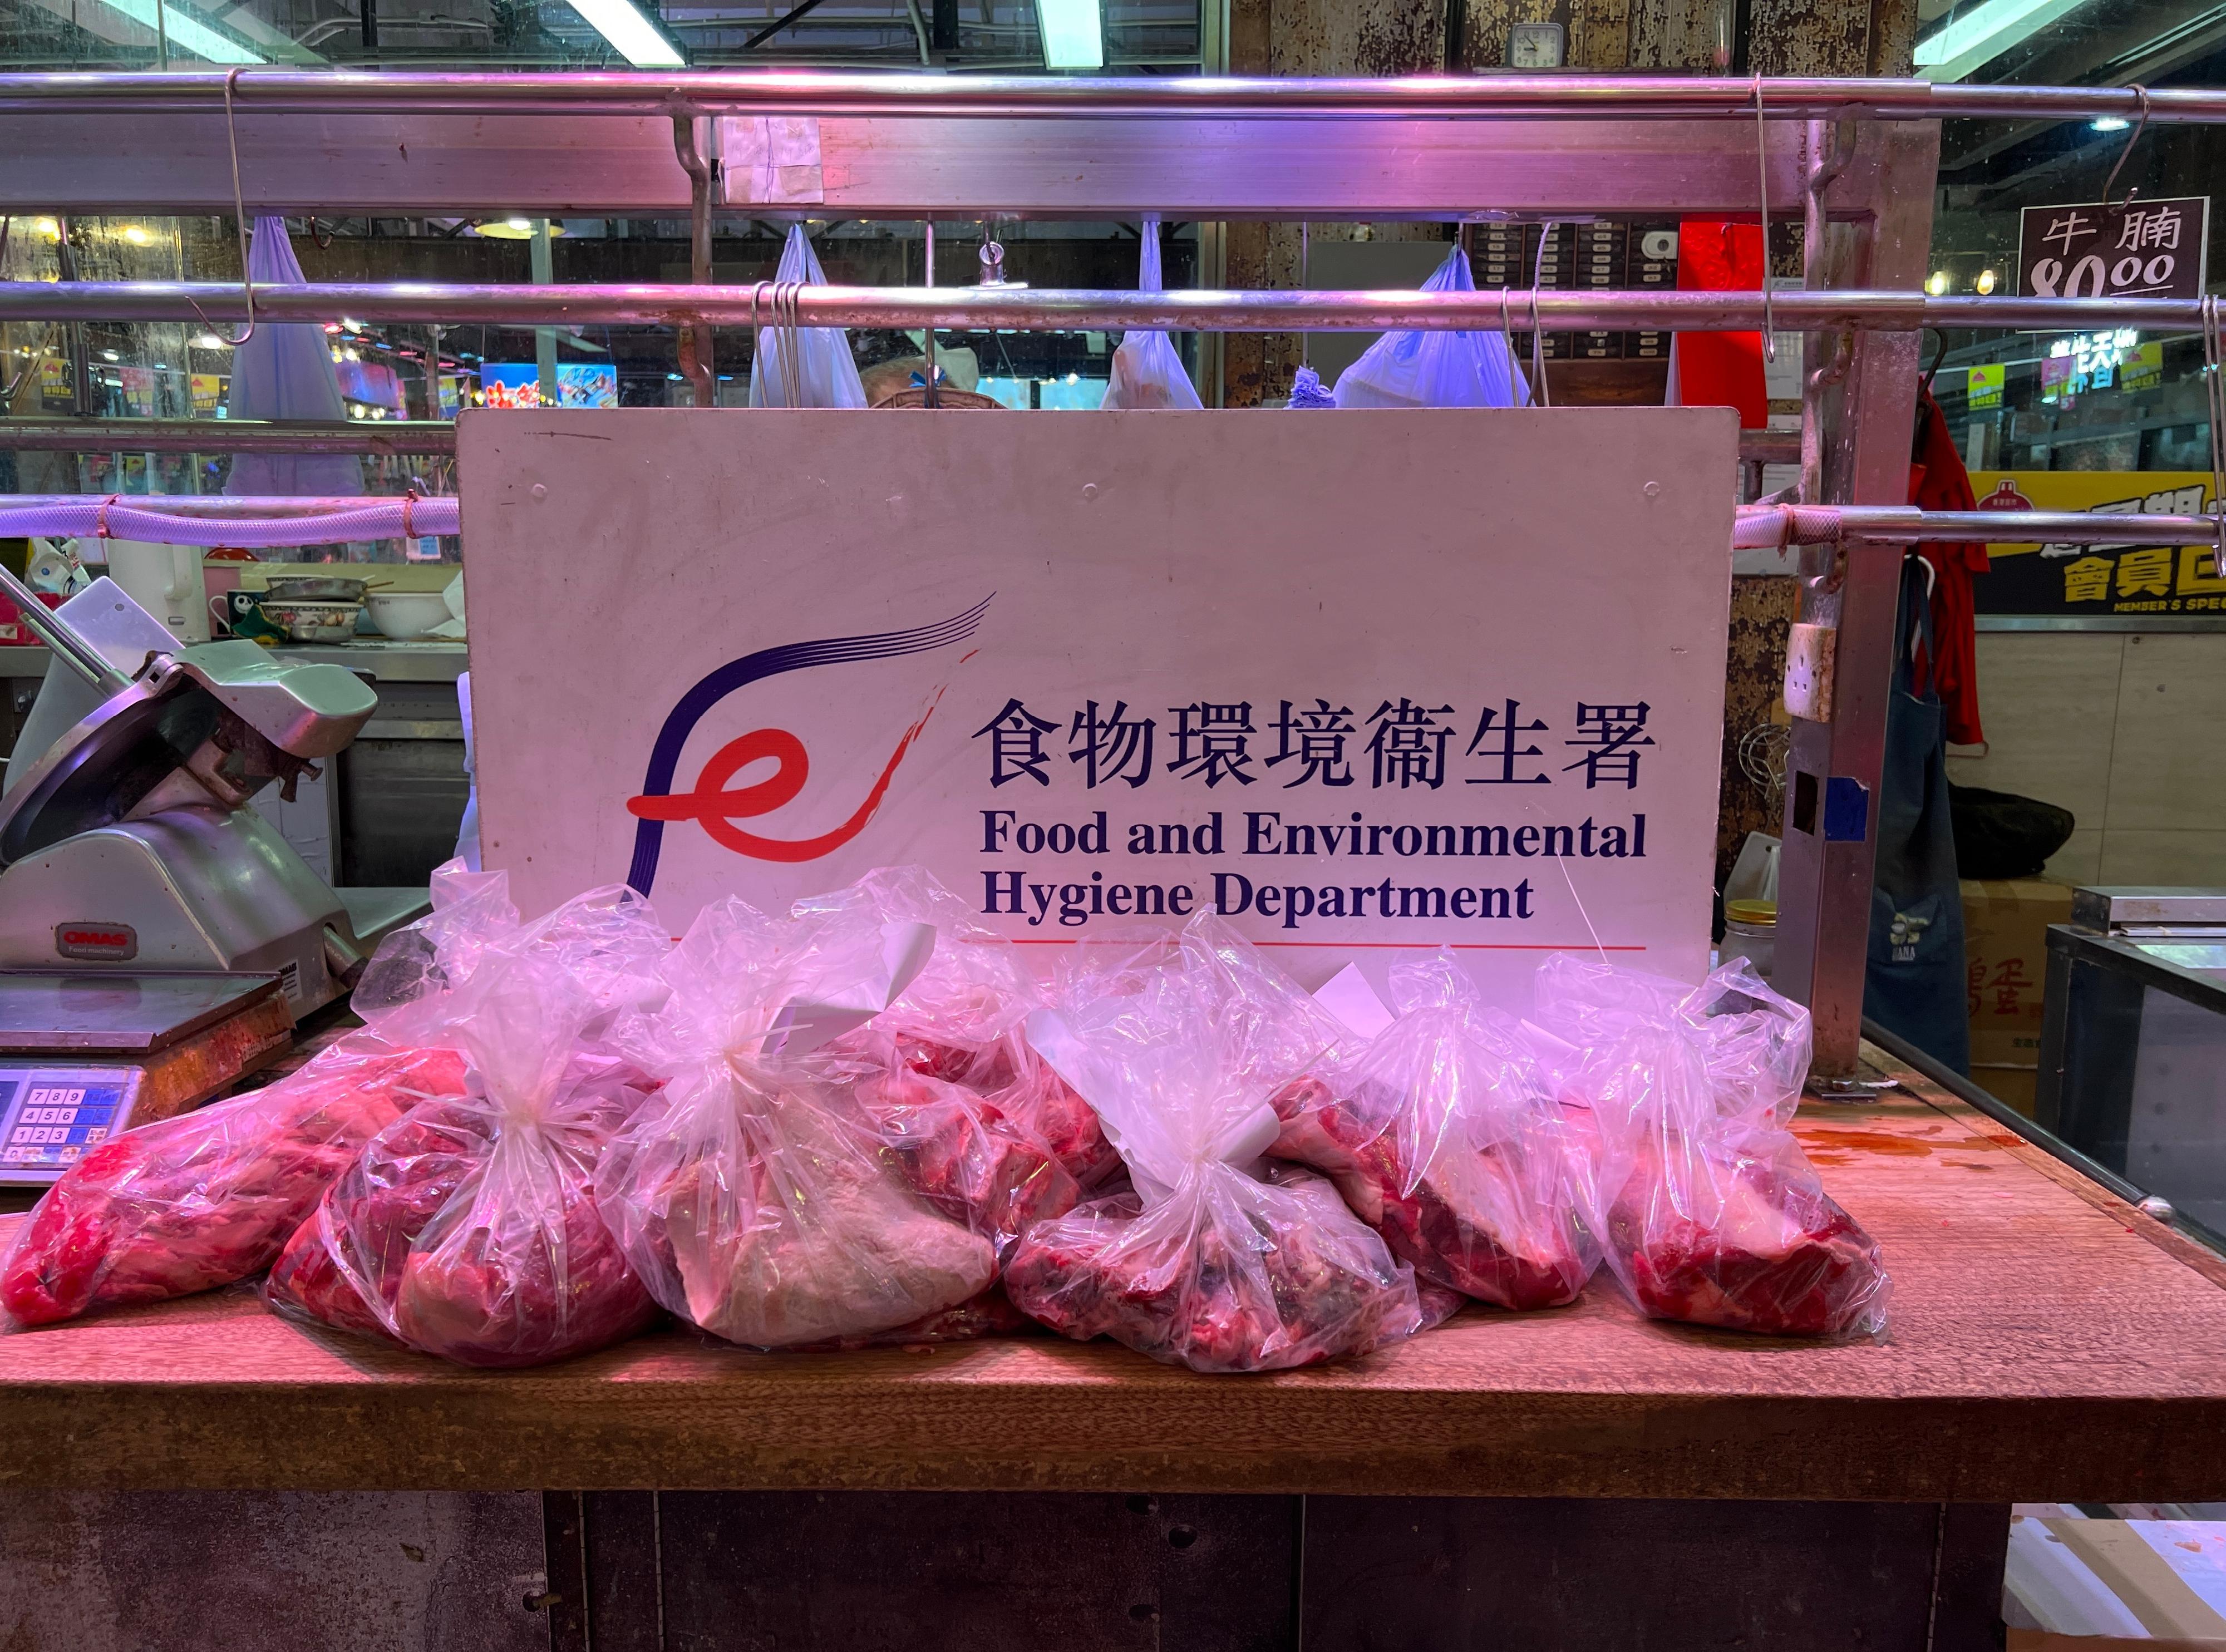 The Food and Environmental Hygiene Department (FEHD) raided a licensed fresh provision shop in Sha Tin District suspected of selling frozen meat as fresh meat today (June 27). Photo shows some of the meat seized by FEHD officers during the operation.